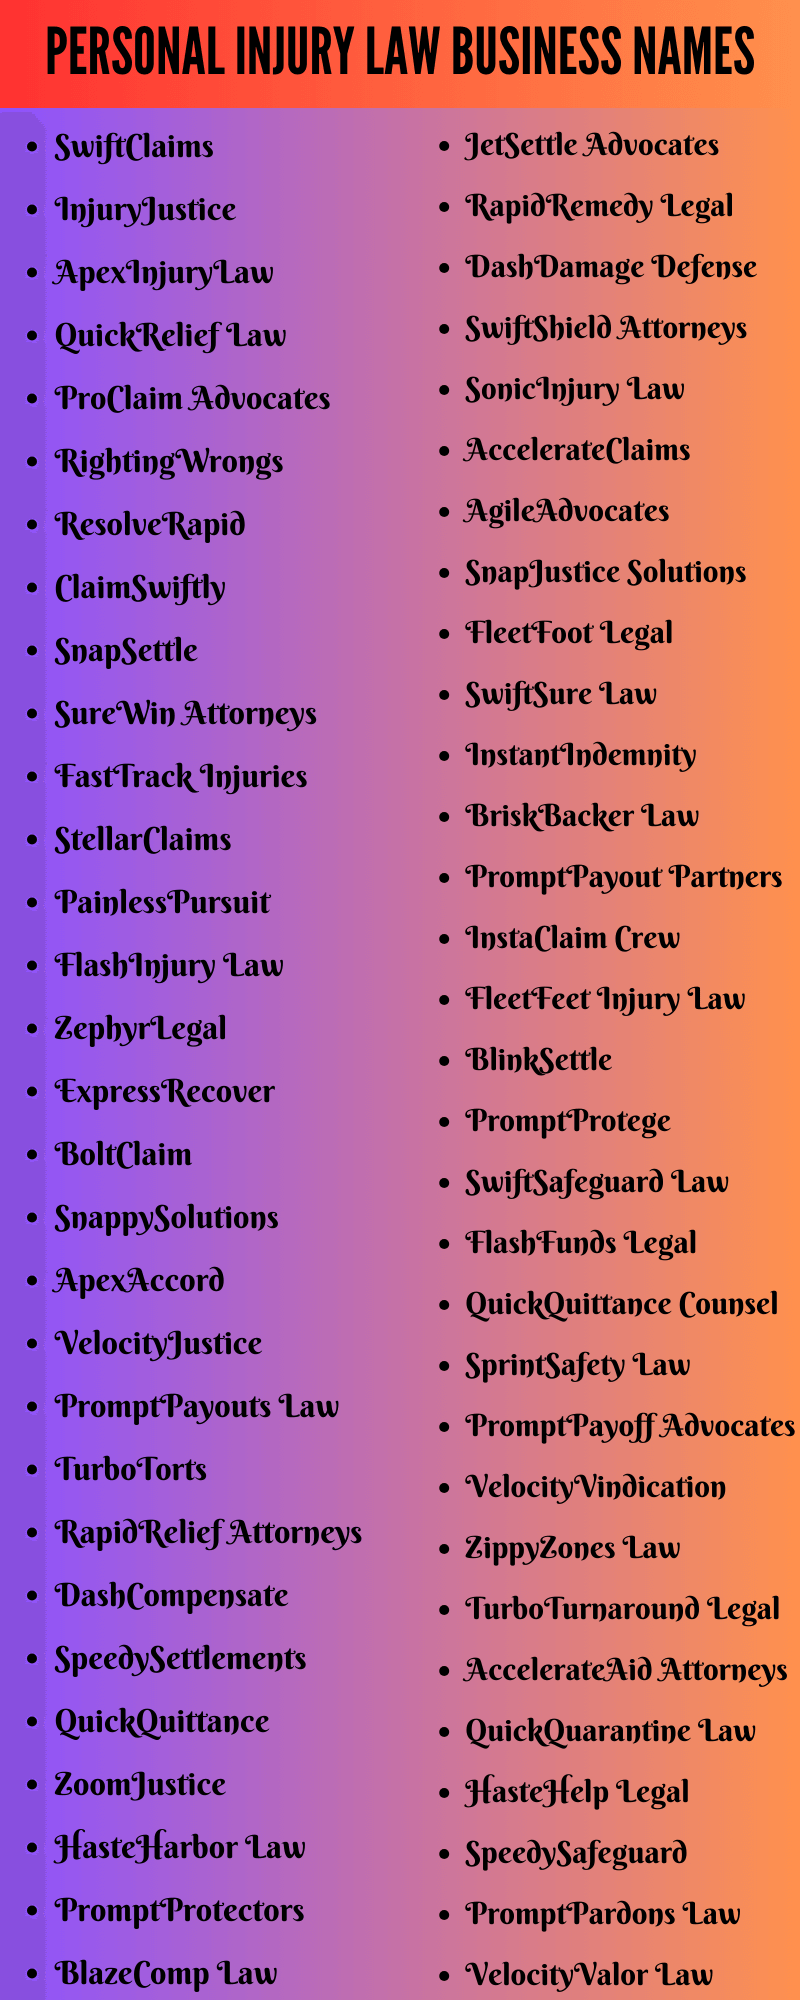 Personal Injury Law Business Names